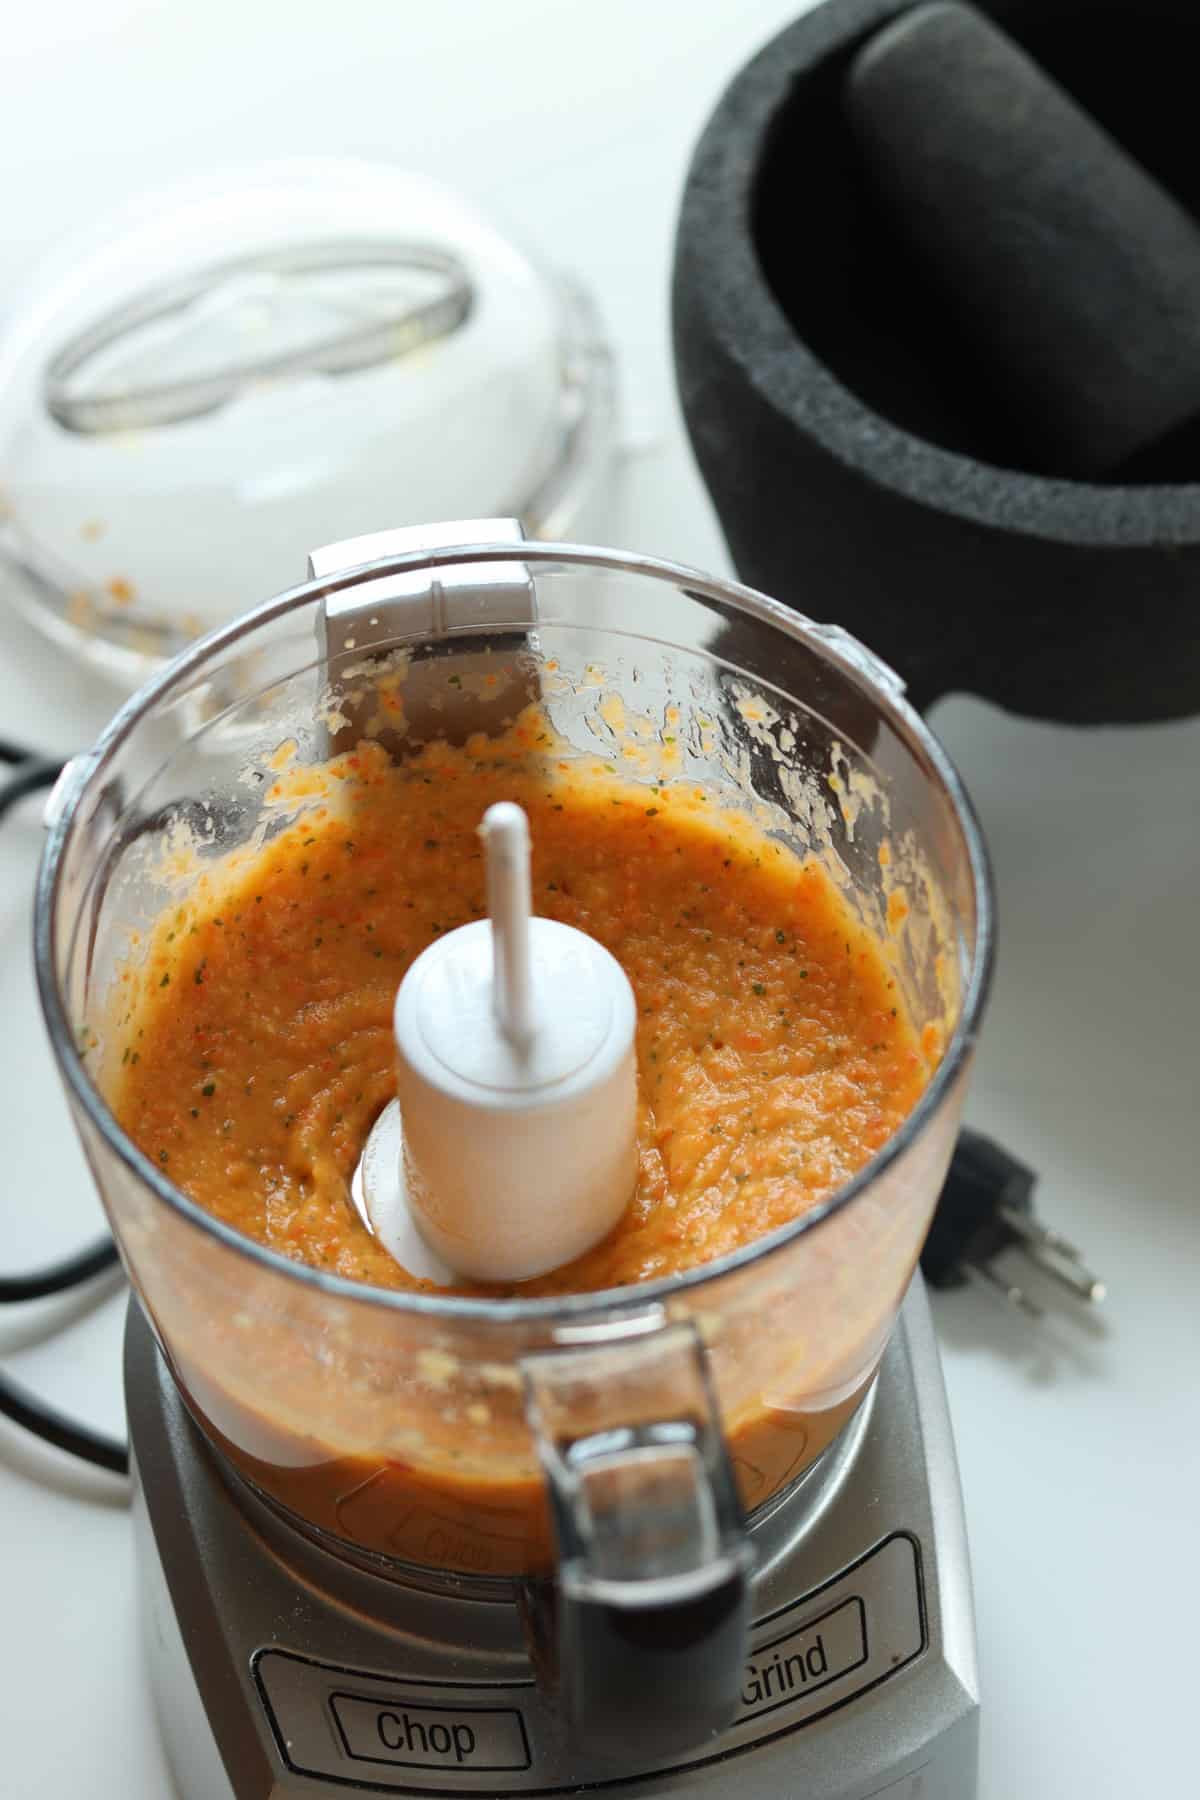 rouille pureed in a food processor